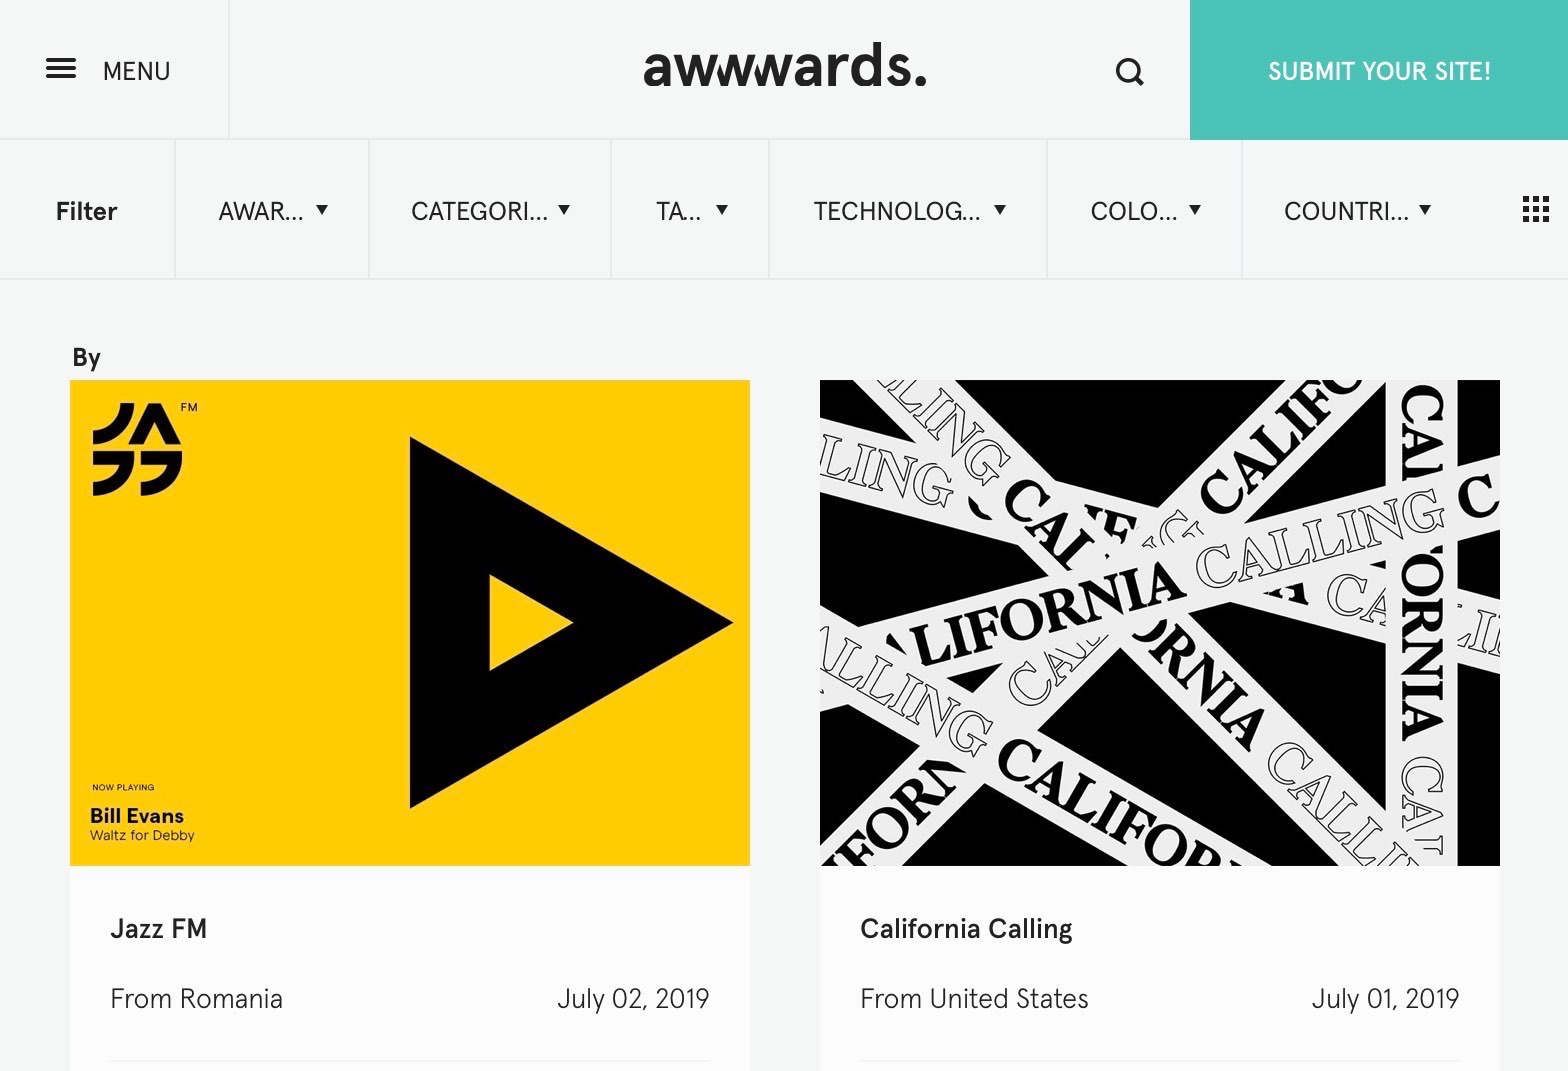 Discover the best website designs of the world. Awwwards recognizes the talent and effort of the best designers, web developers and digital agencies.